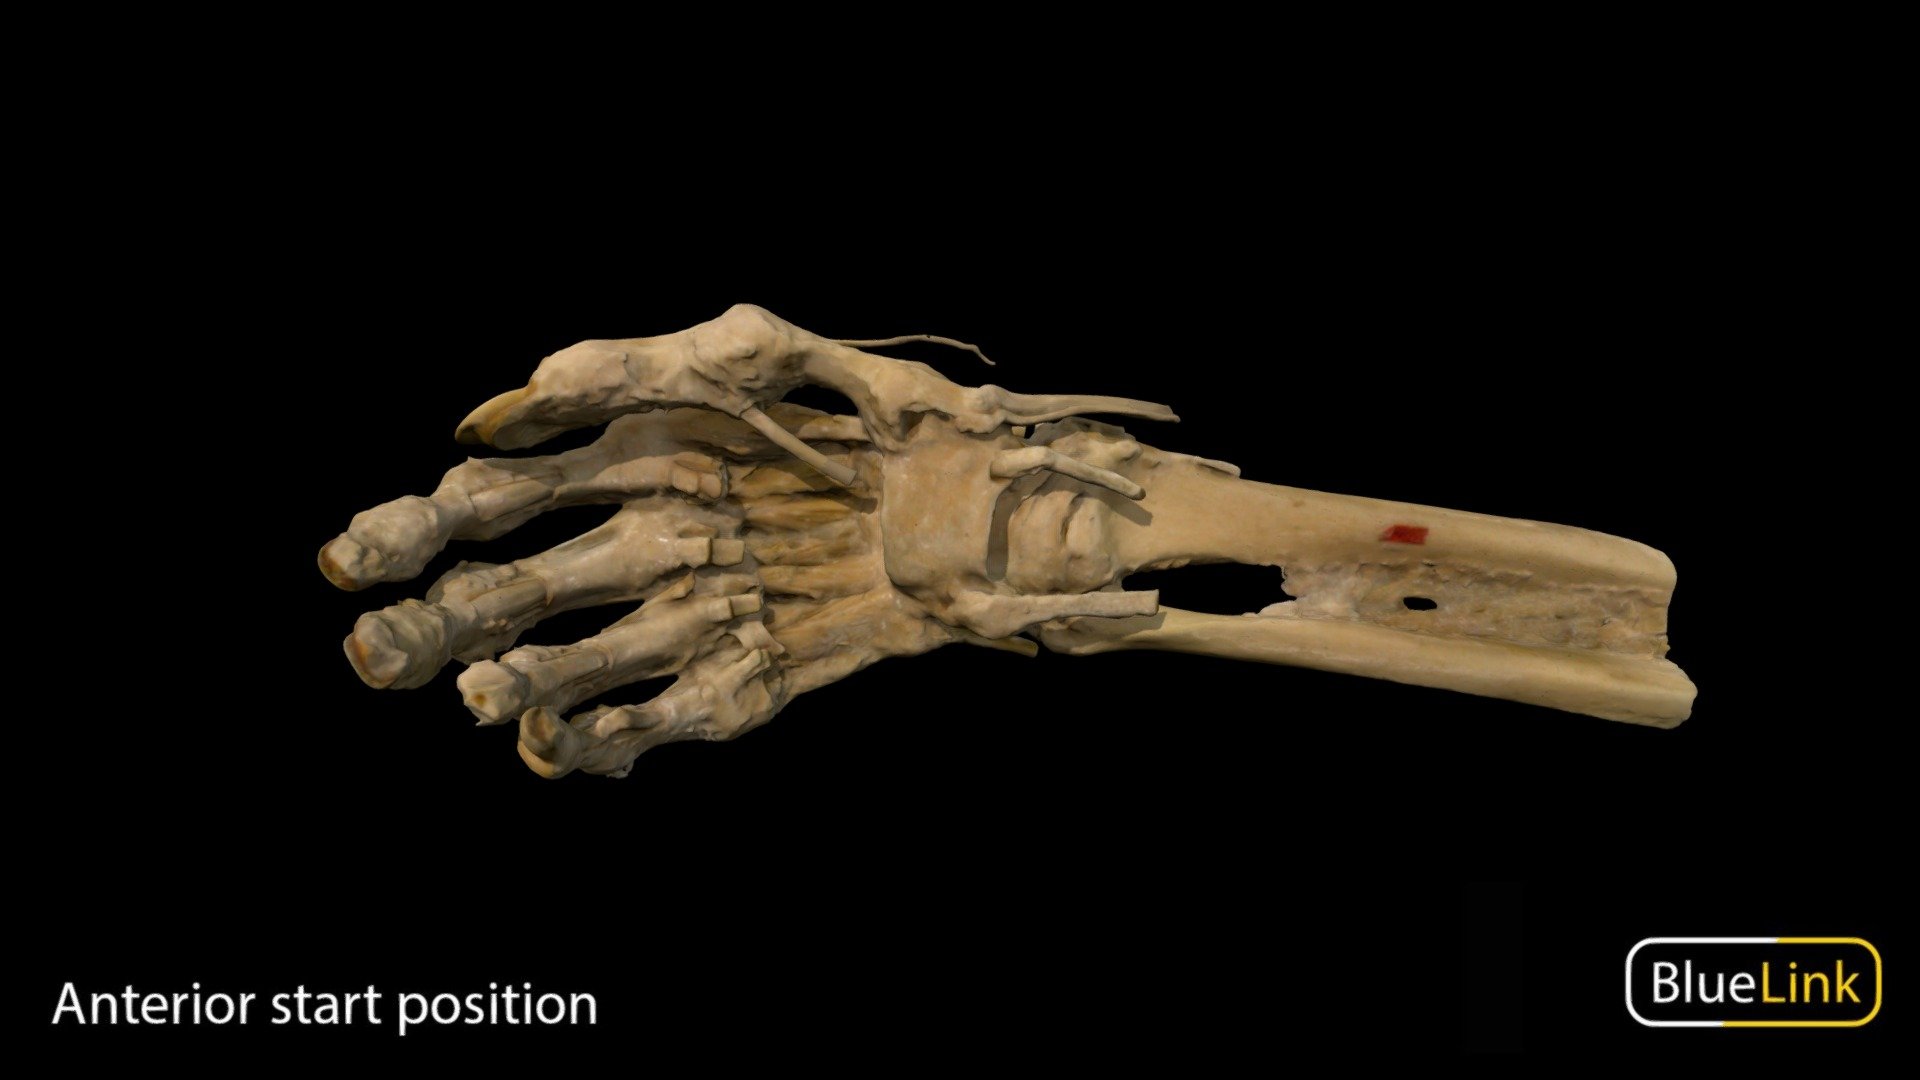 A 3D scan of a human distal forearm showcasing the carpal tunnel and interossi muscles. 

Captured with Einscan Pro

Carpal Tunnel reconstructed with Meshmixer and Meshlab

Captured and edited by: Will Gribbin

Copyright2019 BK Alsup &amp; GM Fox

ID 91042-U10 - Carpal Tunnel - 3D model by Bluelink Anatomy - University of Michigan (@bluelinkanatomy) 3d model